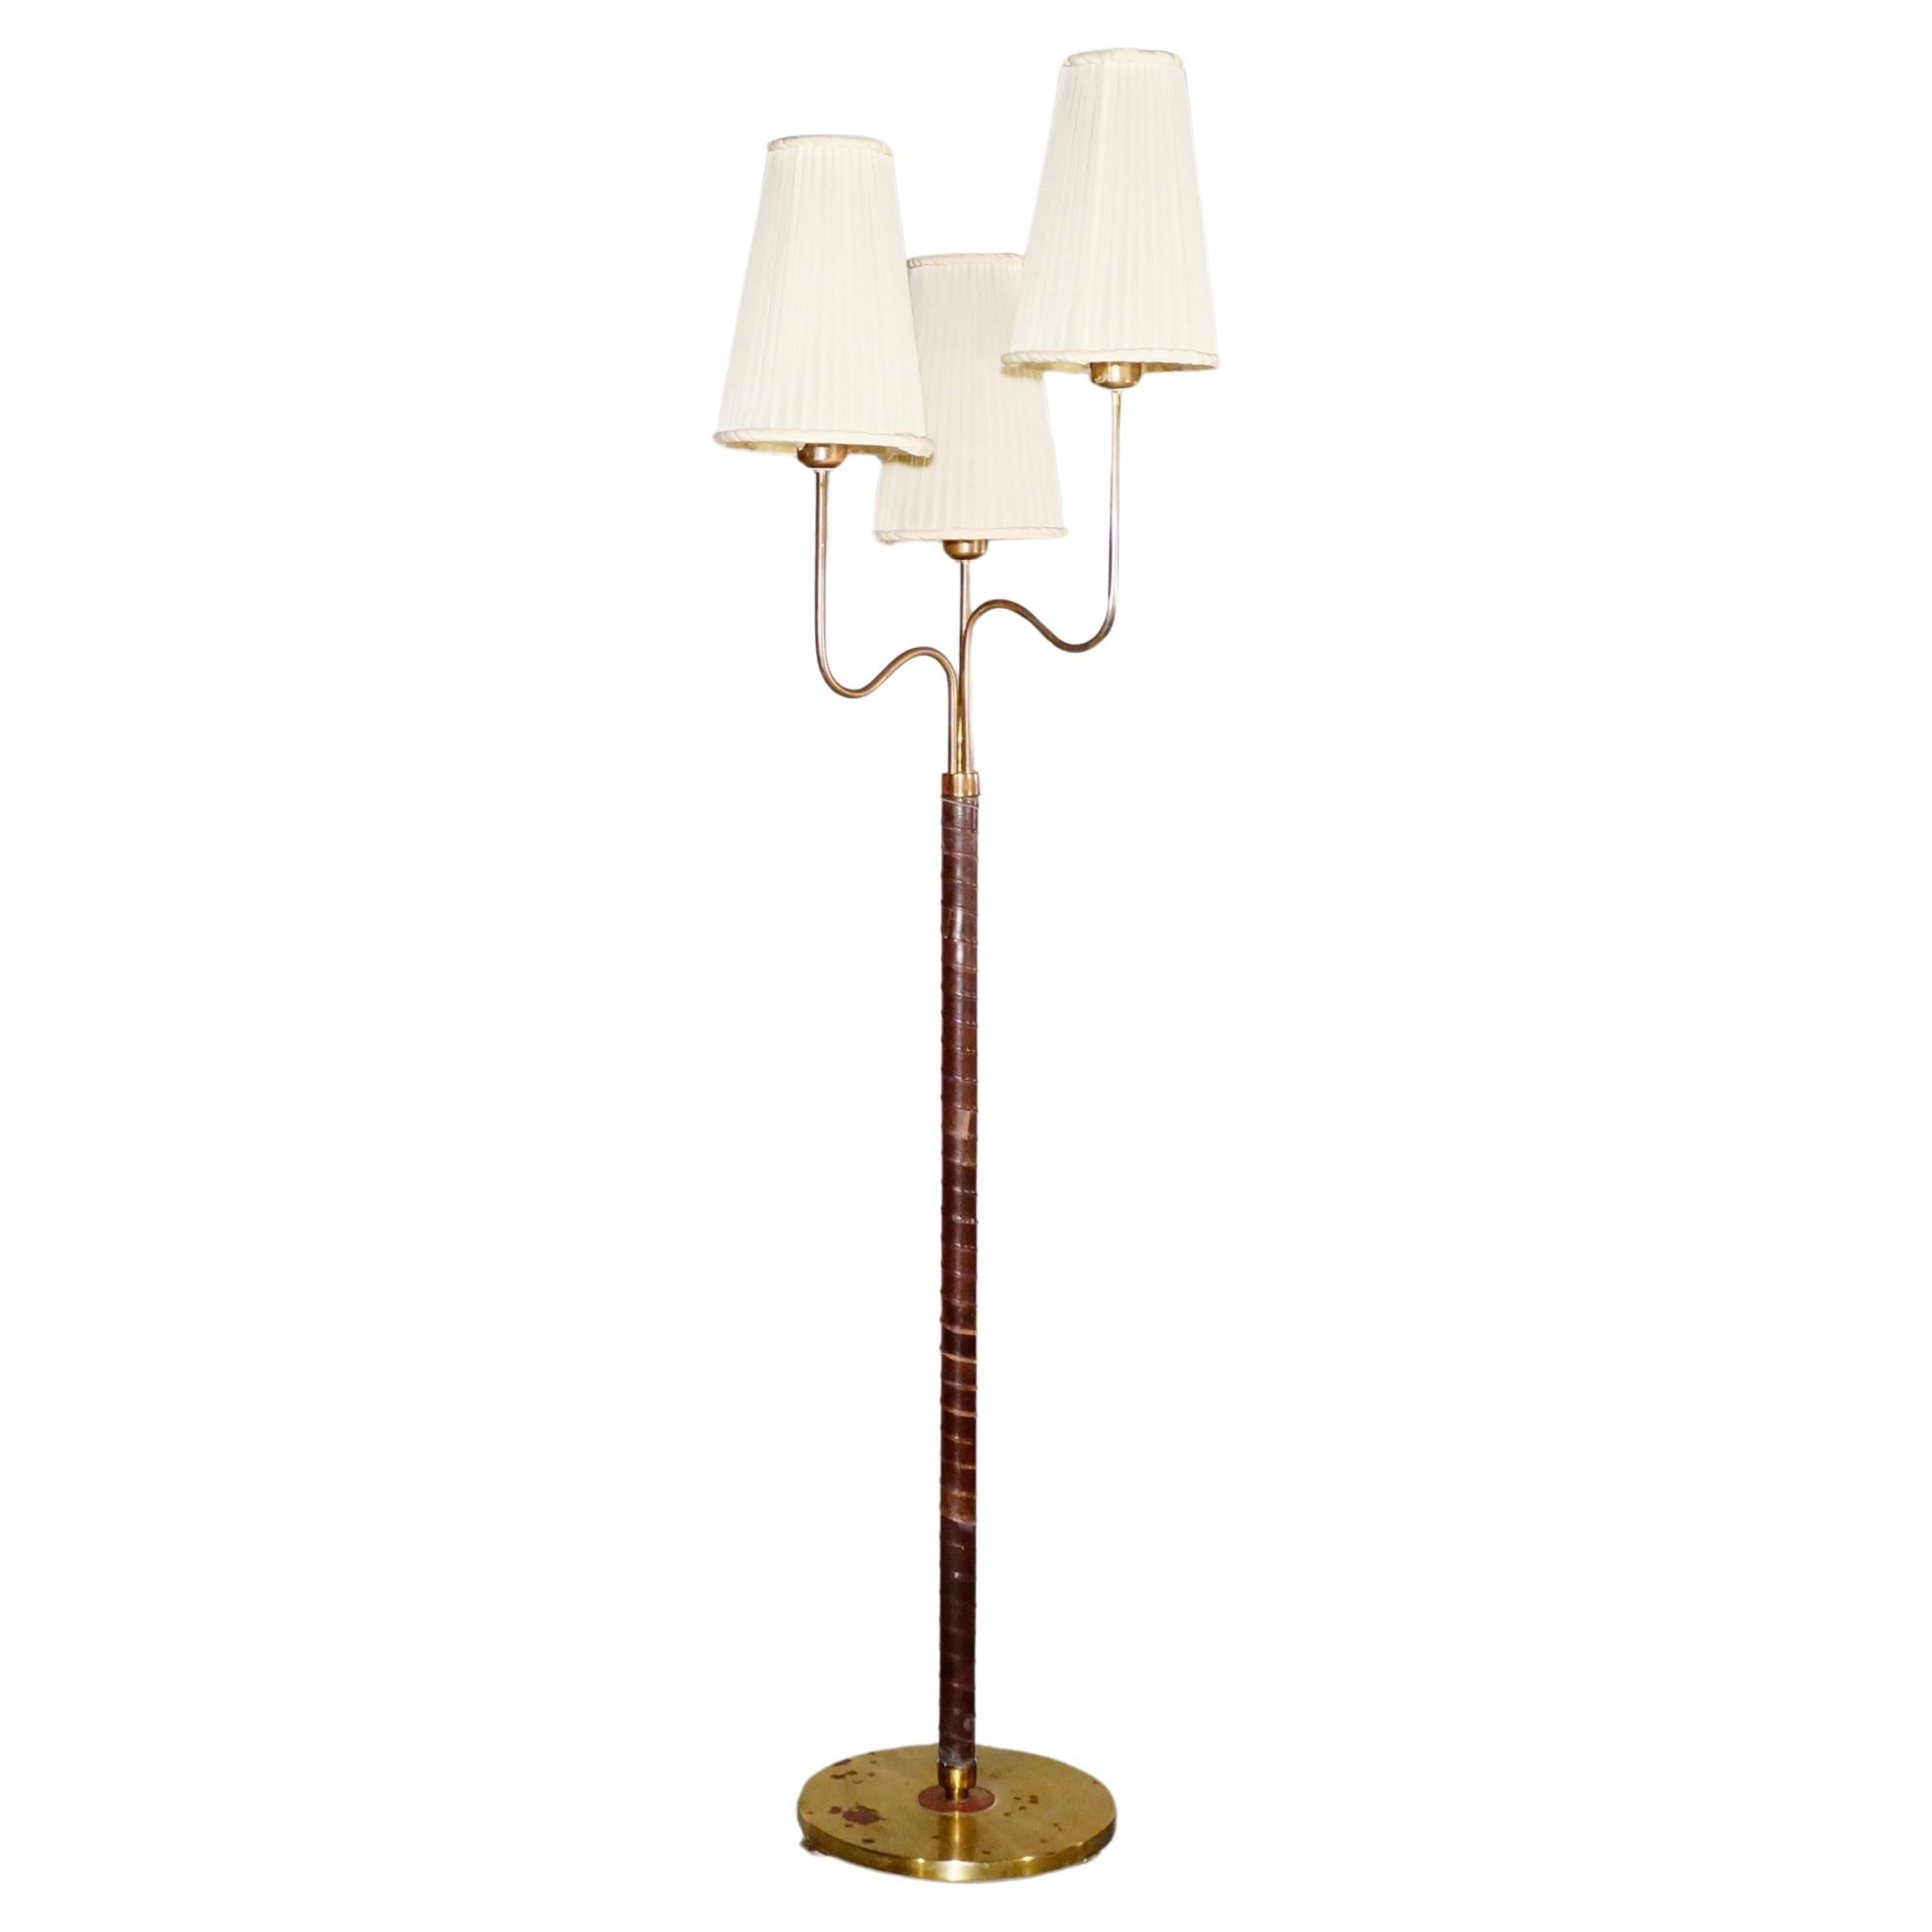 Rare Floor Lamp by Hans Bergström for ASEA from the 1946s